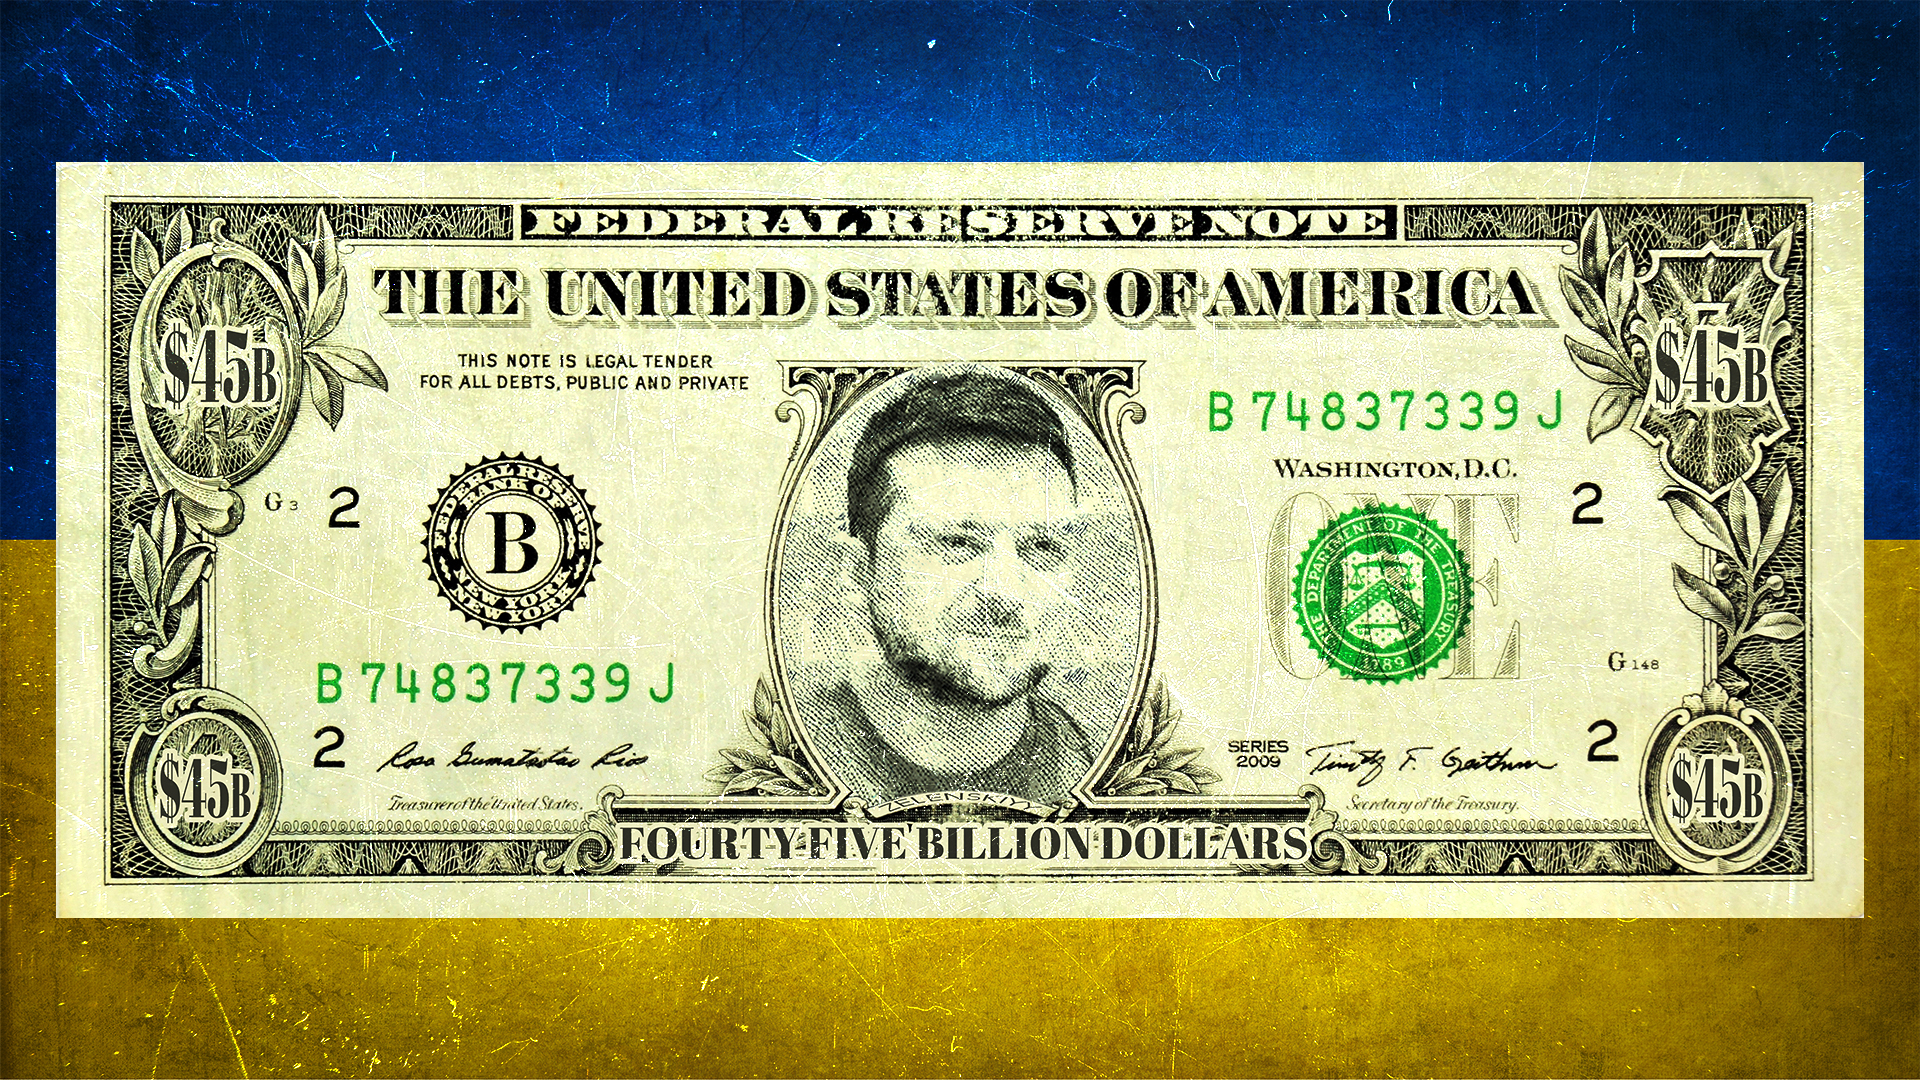 The U.S. House of Representatives has approved a $45bn aid package for Ukraine. /Illustration by Butchy Davy/CGTN